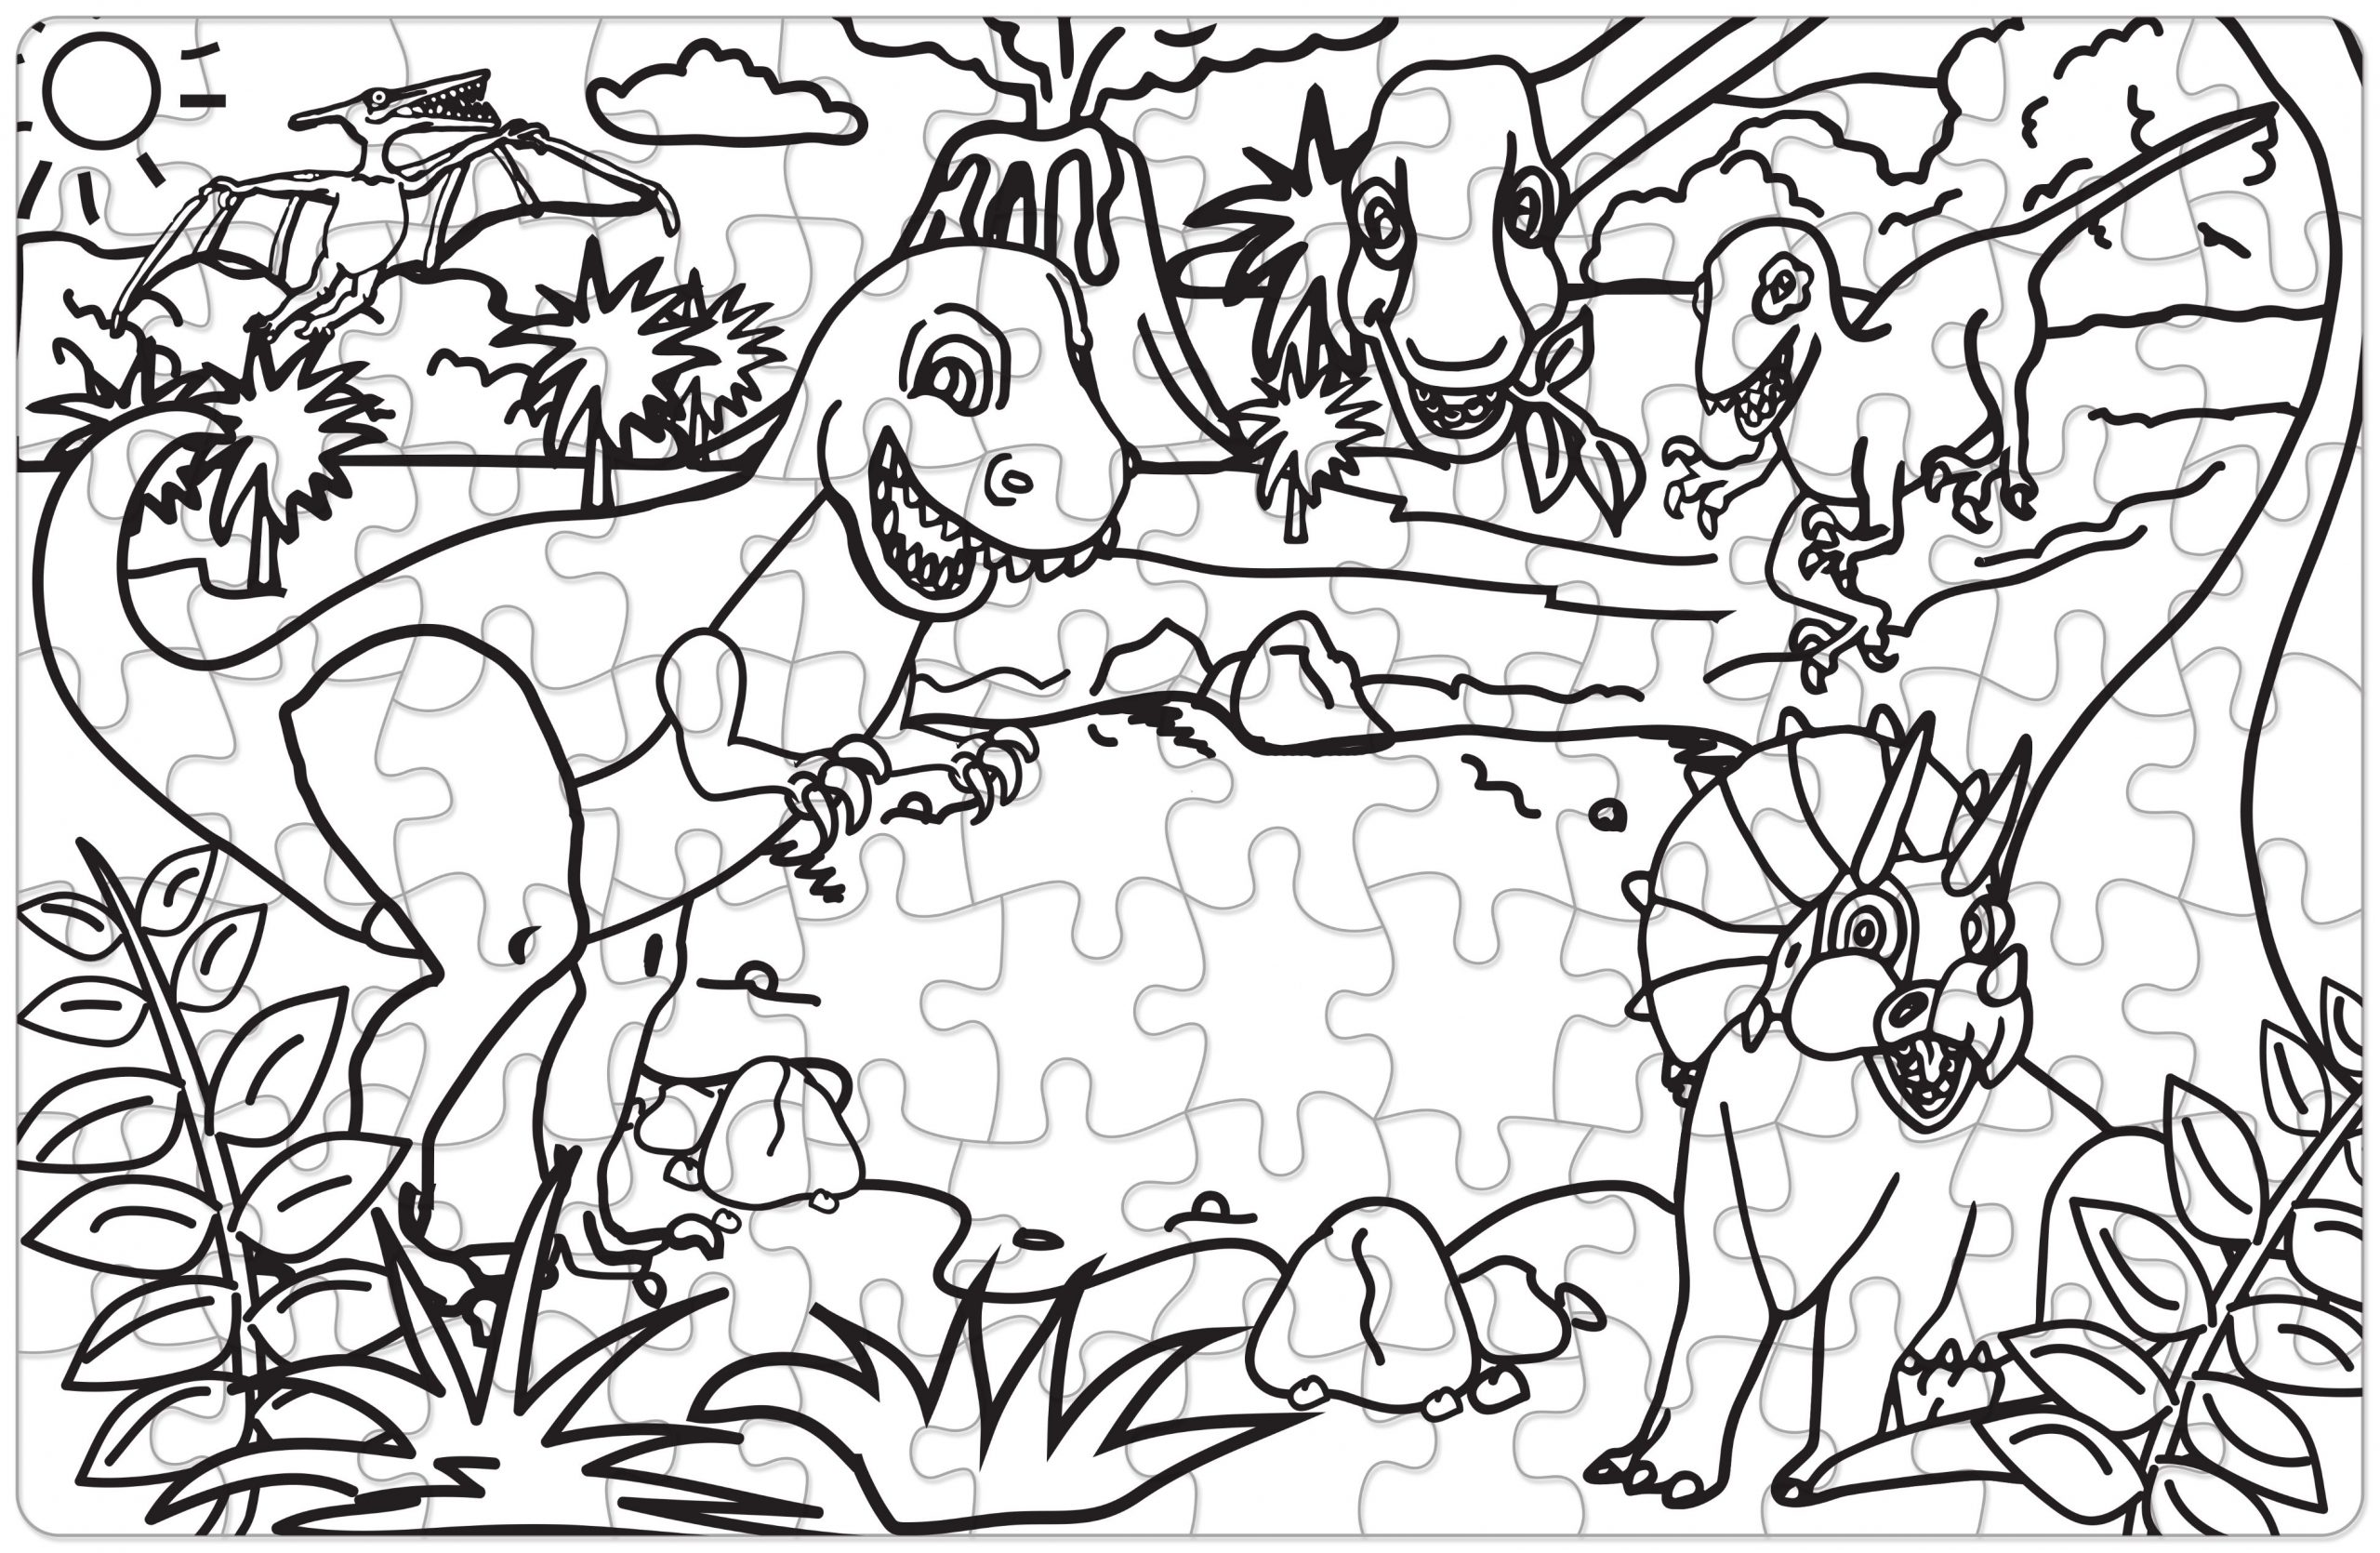 Get Your Cray On Puzzle - Dinosaur